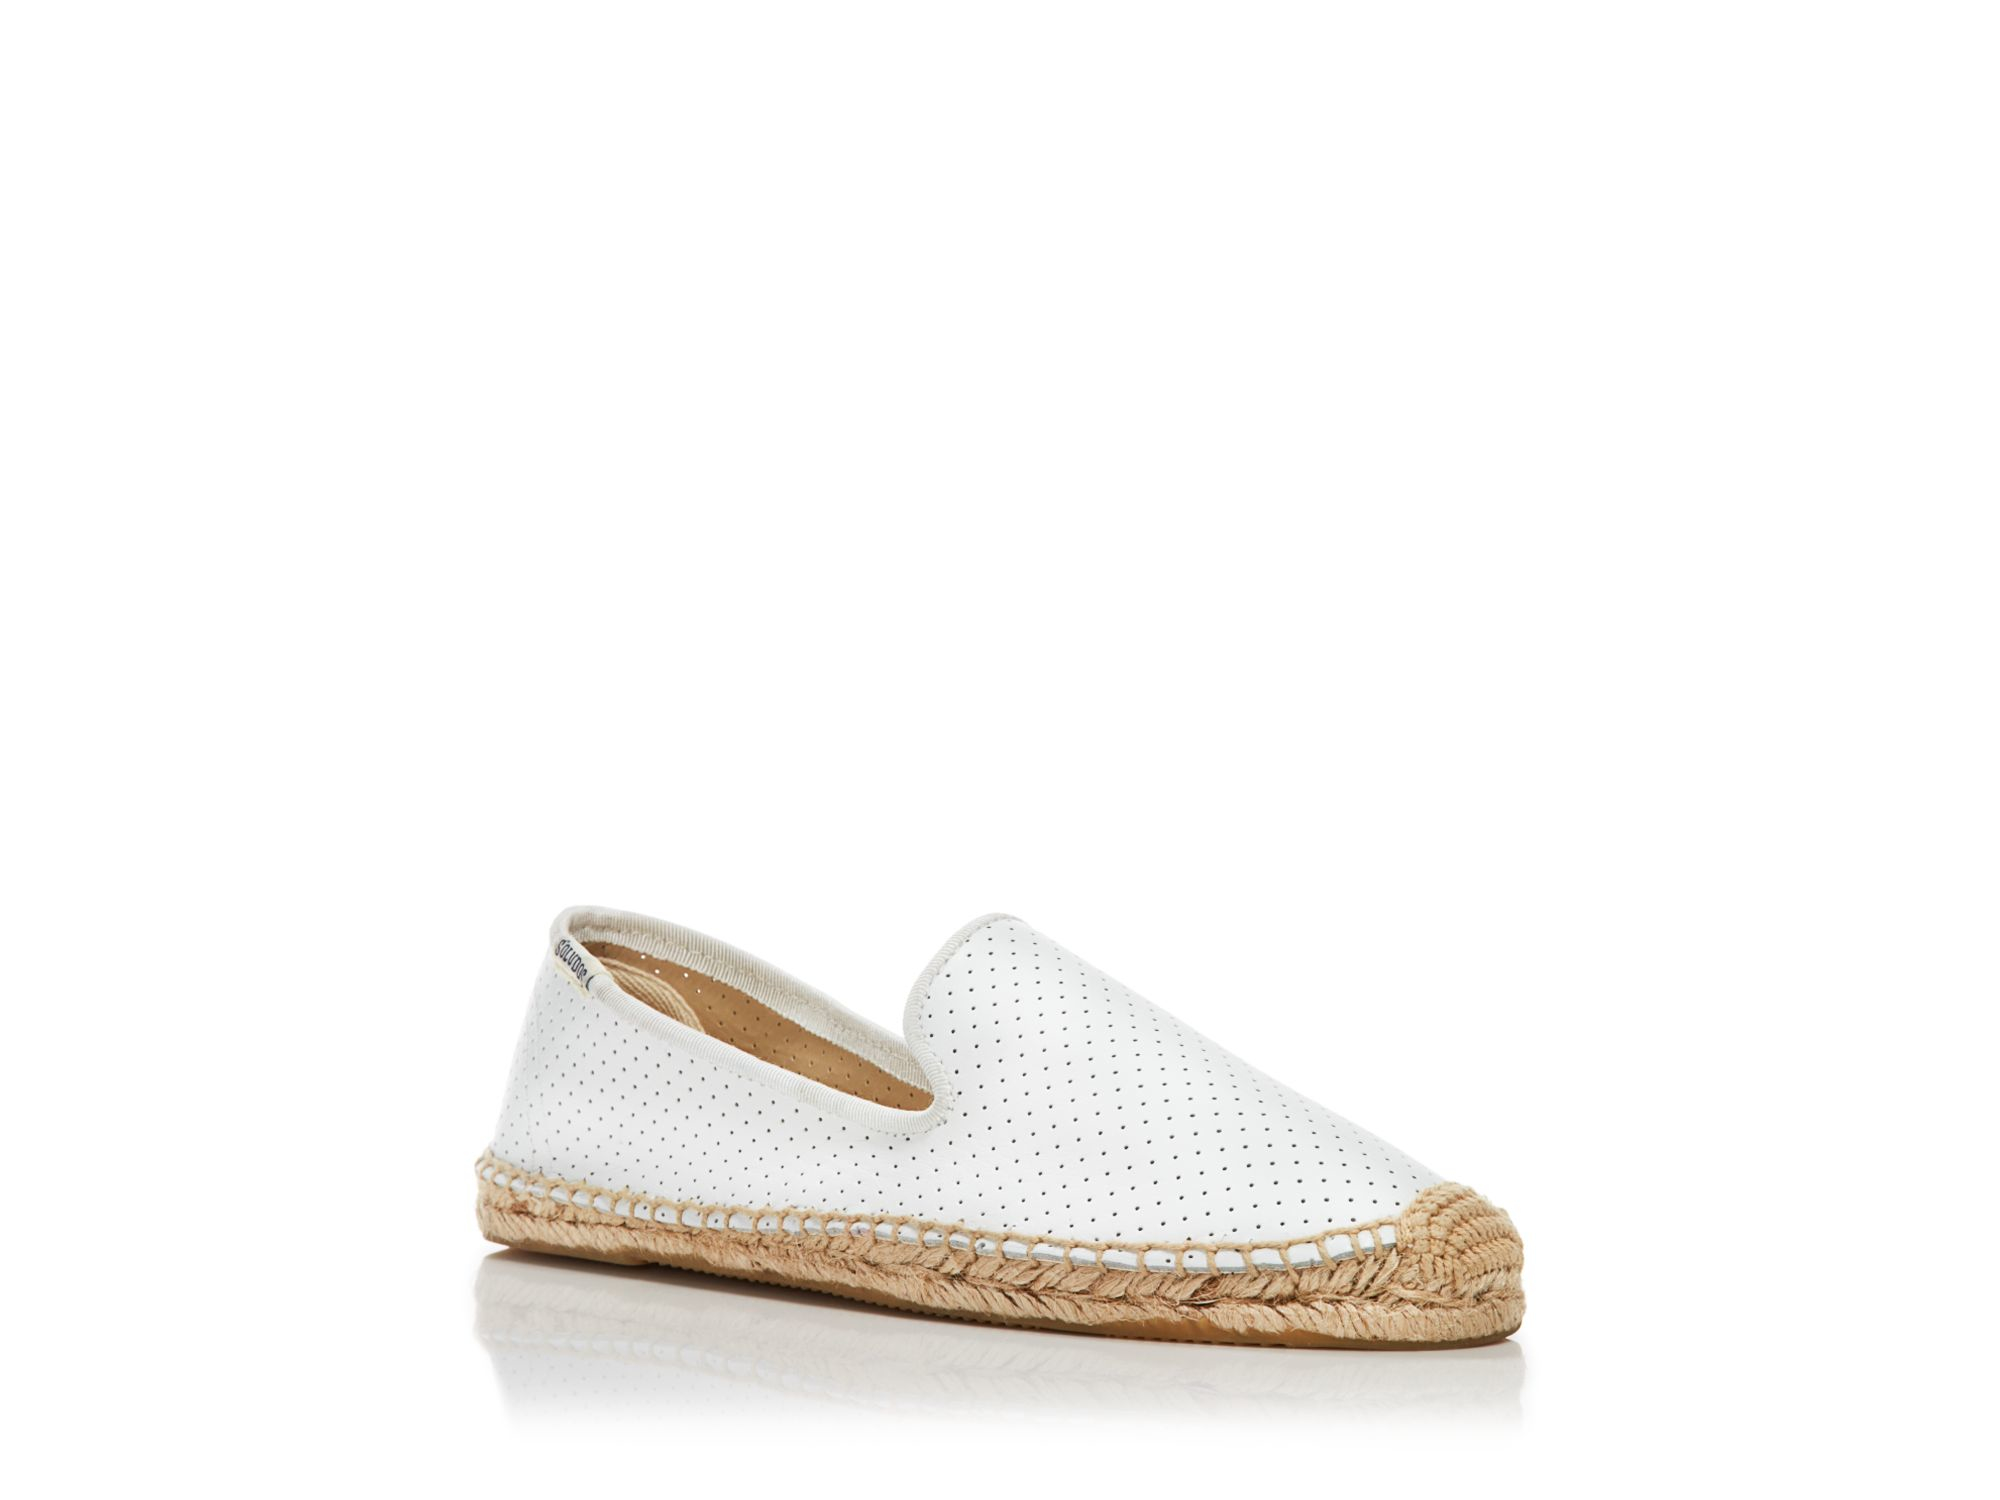 Soludos Espadrille Flats - Perforated Leather in White (Natural) - Lyst